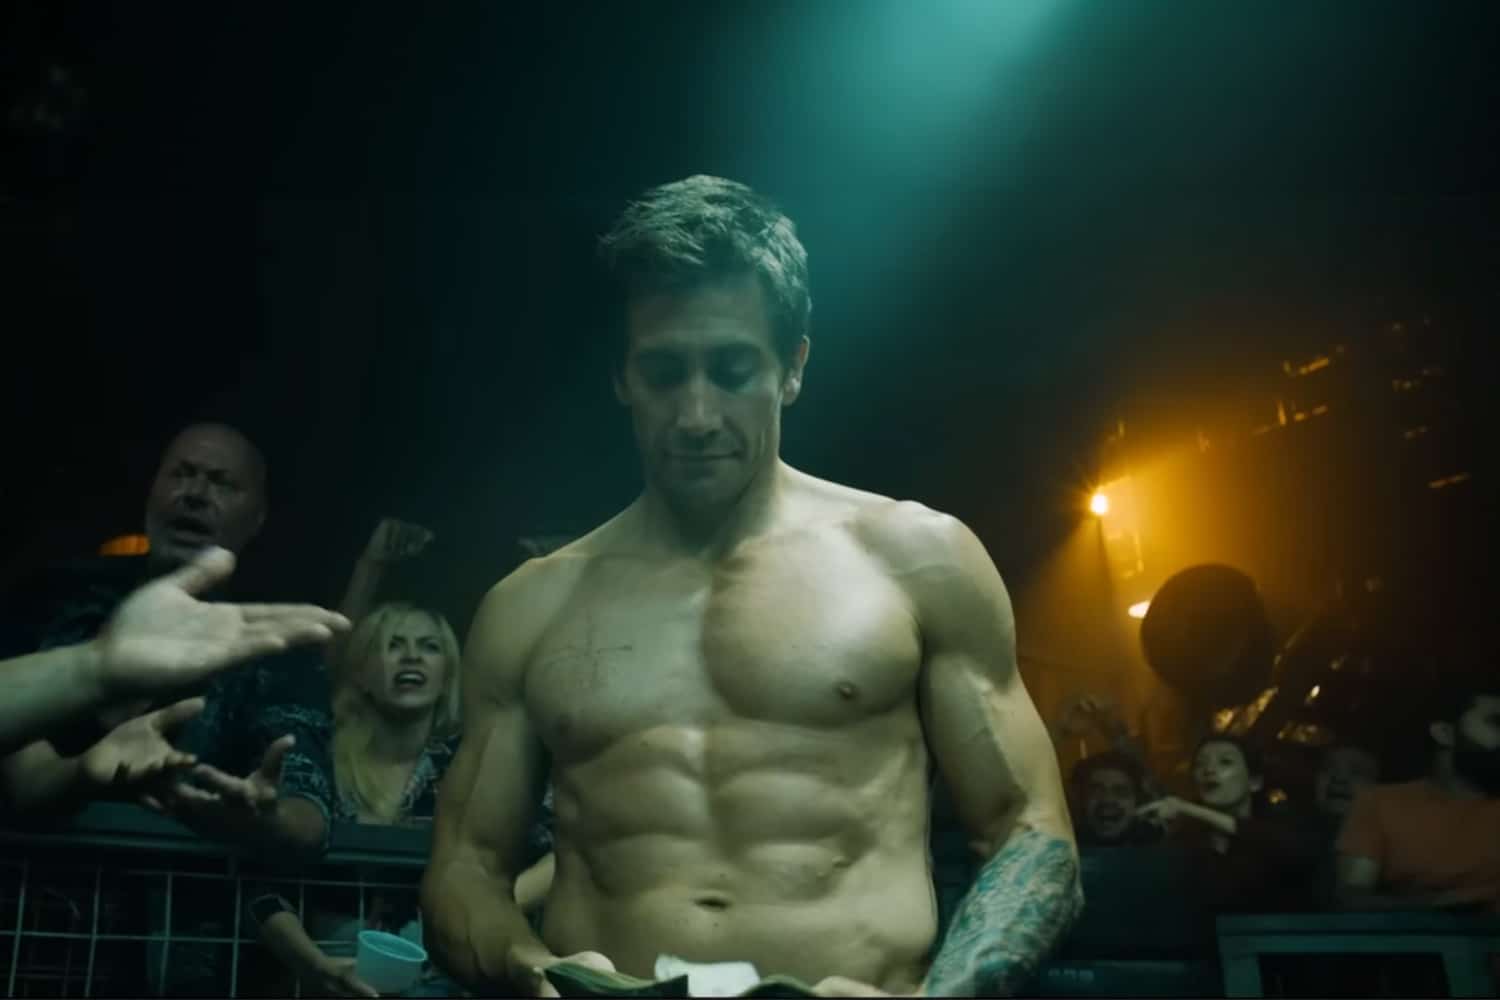 Jake Gyllenhaal 'Road House' workout and diet plan | Image: Amazon Studios